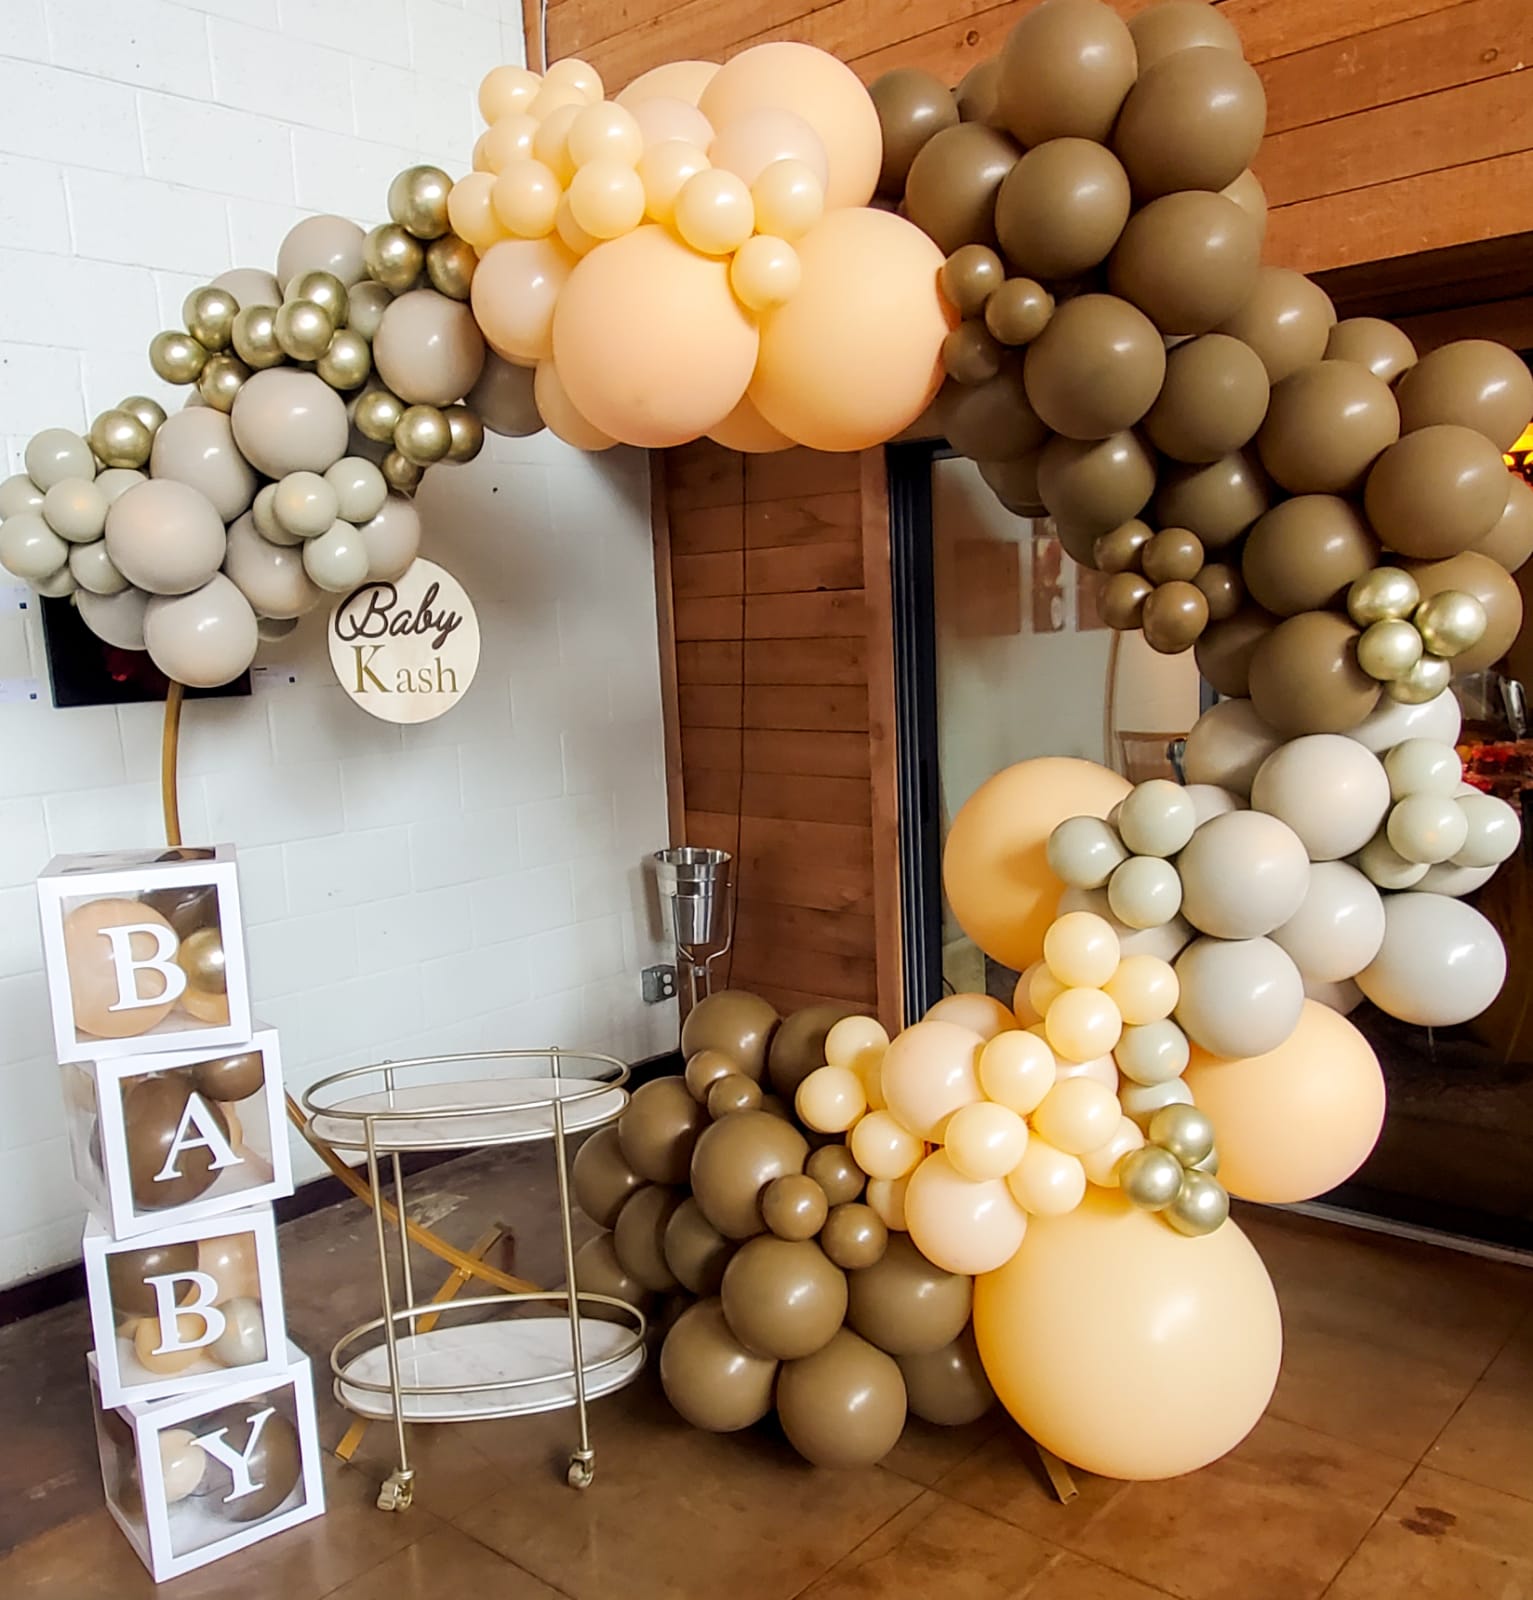 A stunning balloon garland in pastel colors, beautifully adorning a baby shower venue, creating a whimsical and celebratory atmosphere for the occasion.